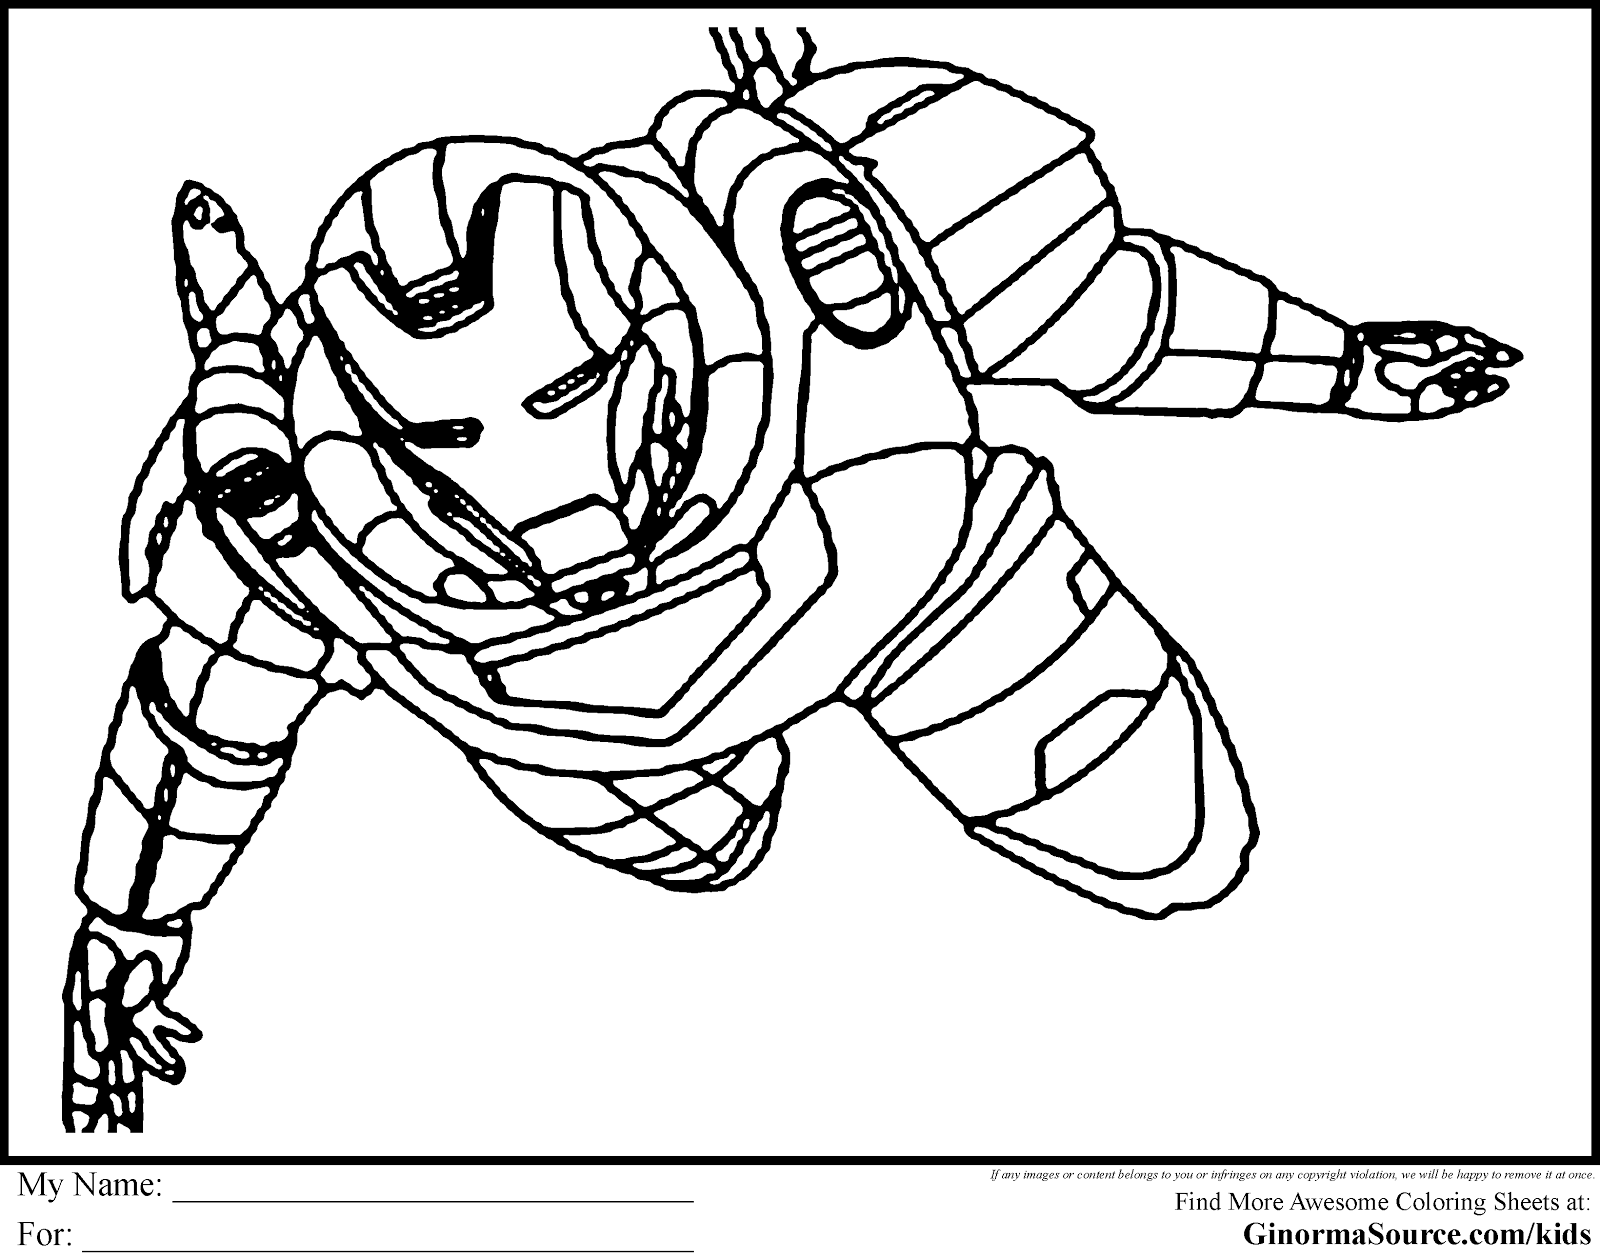 Drawing Avengers #74047 (Superheroes) – Printable coloring pages